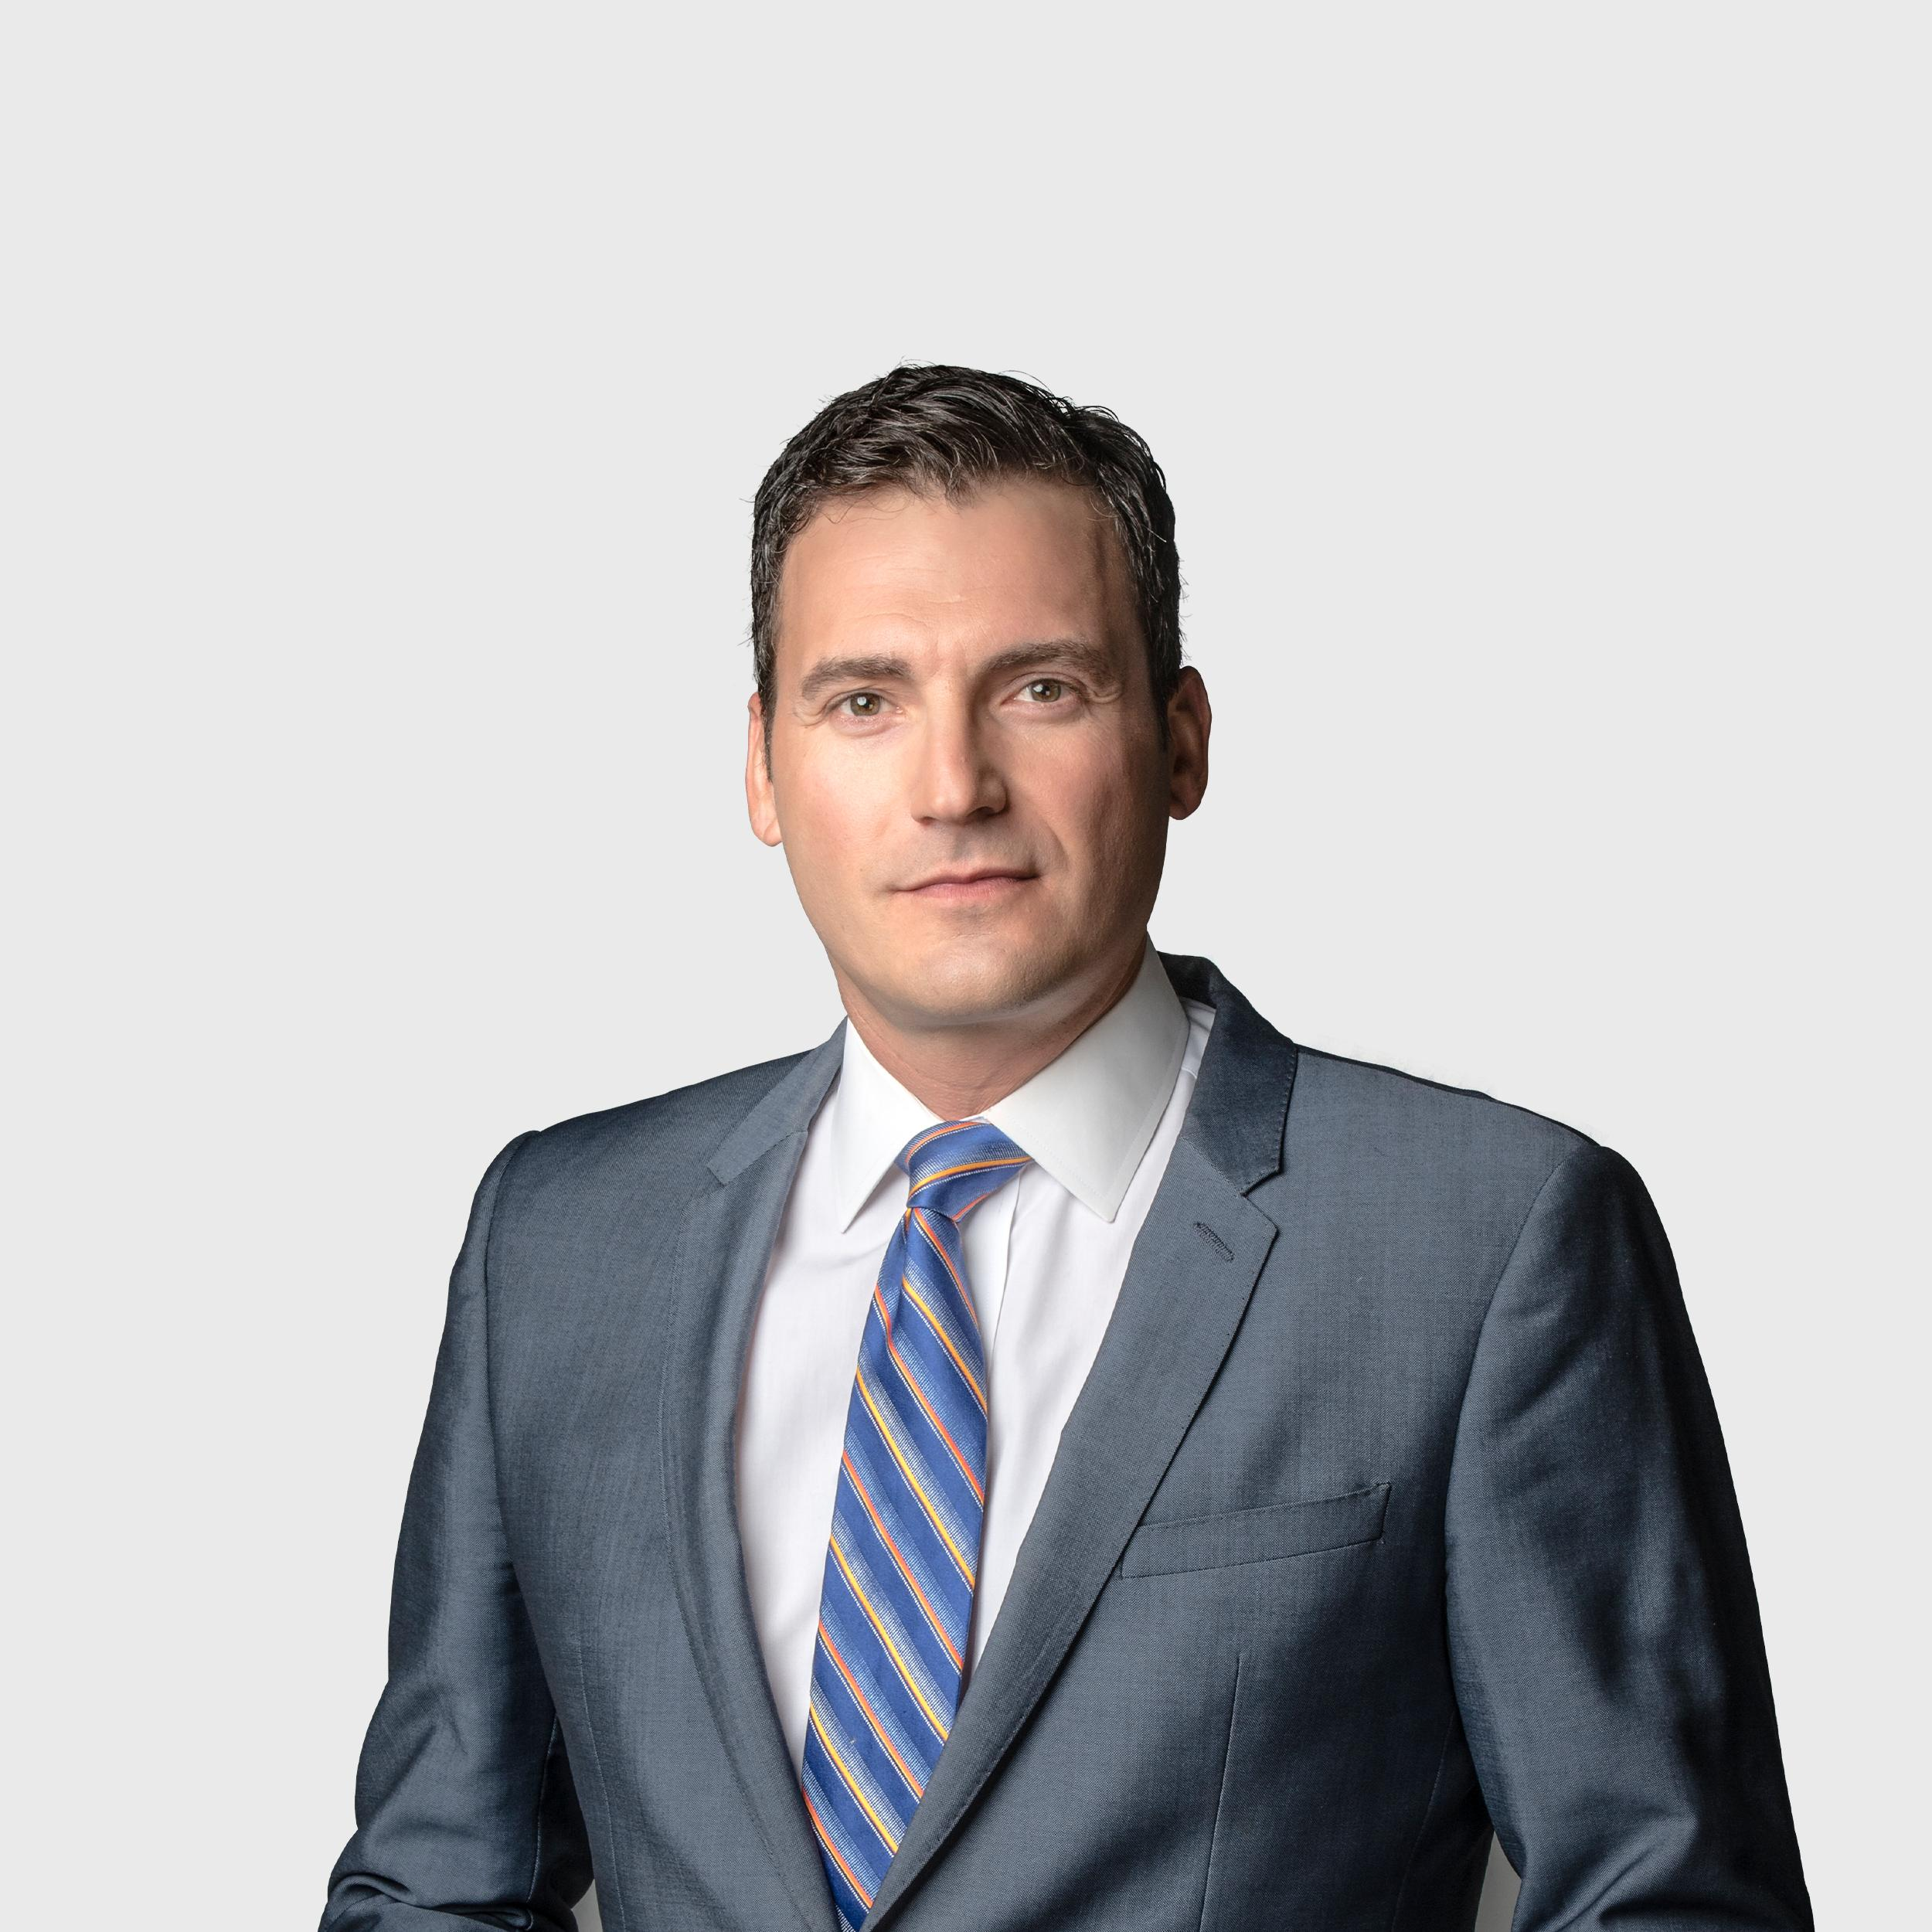 Hour 2 of The Evan Solomon Show for Thurs. August 6th, 2020